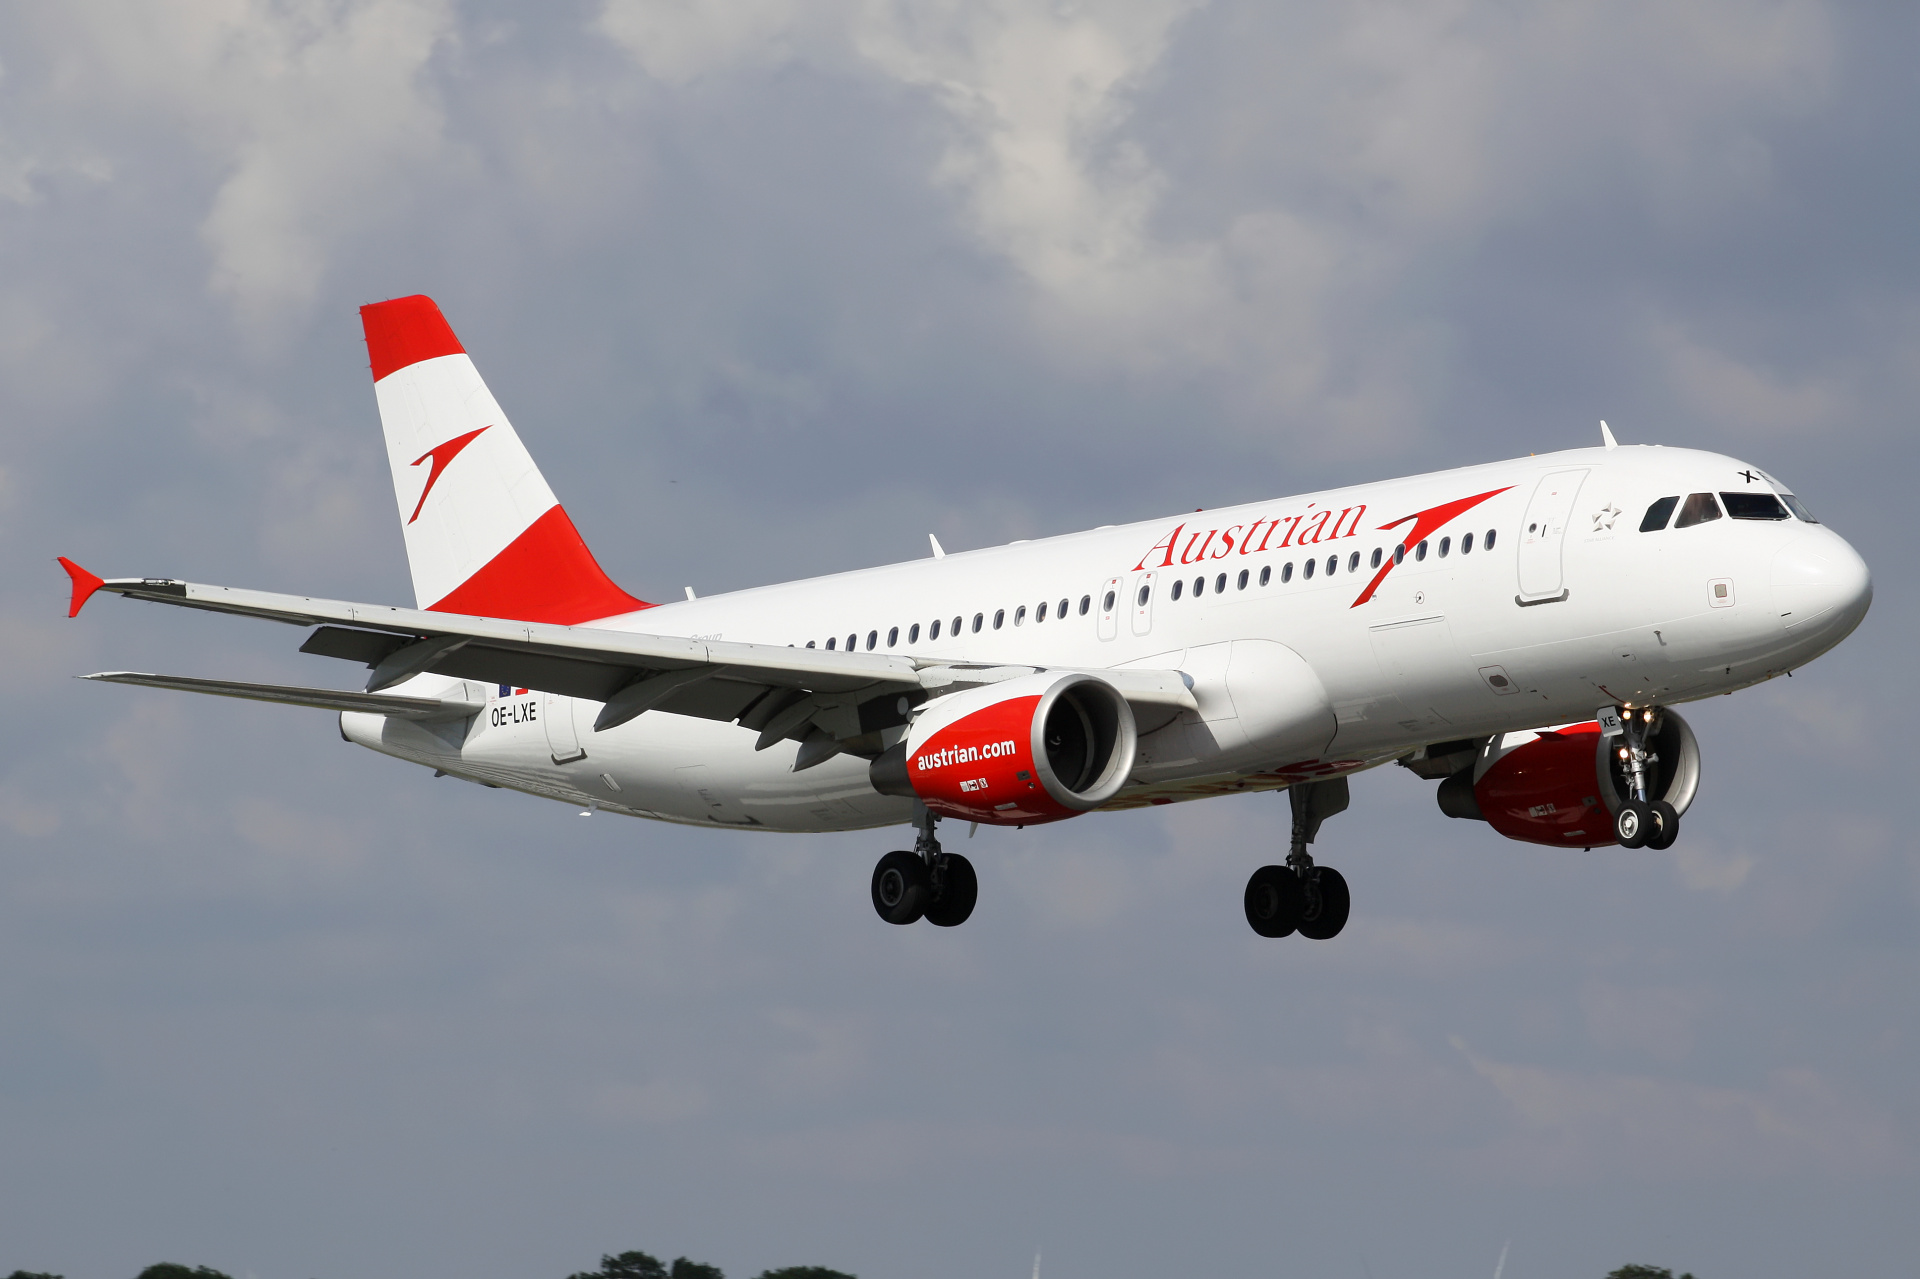 OE-LXE, Austrian Airlines (Samoloty » Spotting na Schiphol » Airbus A320-200)